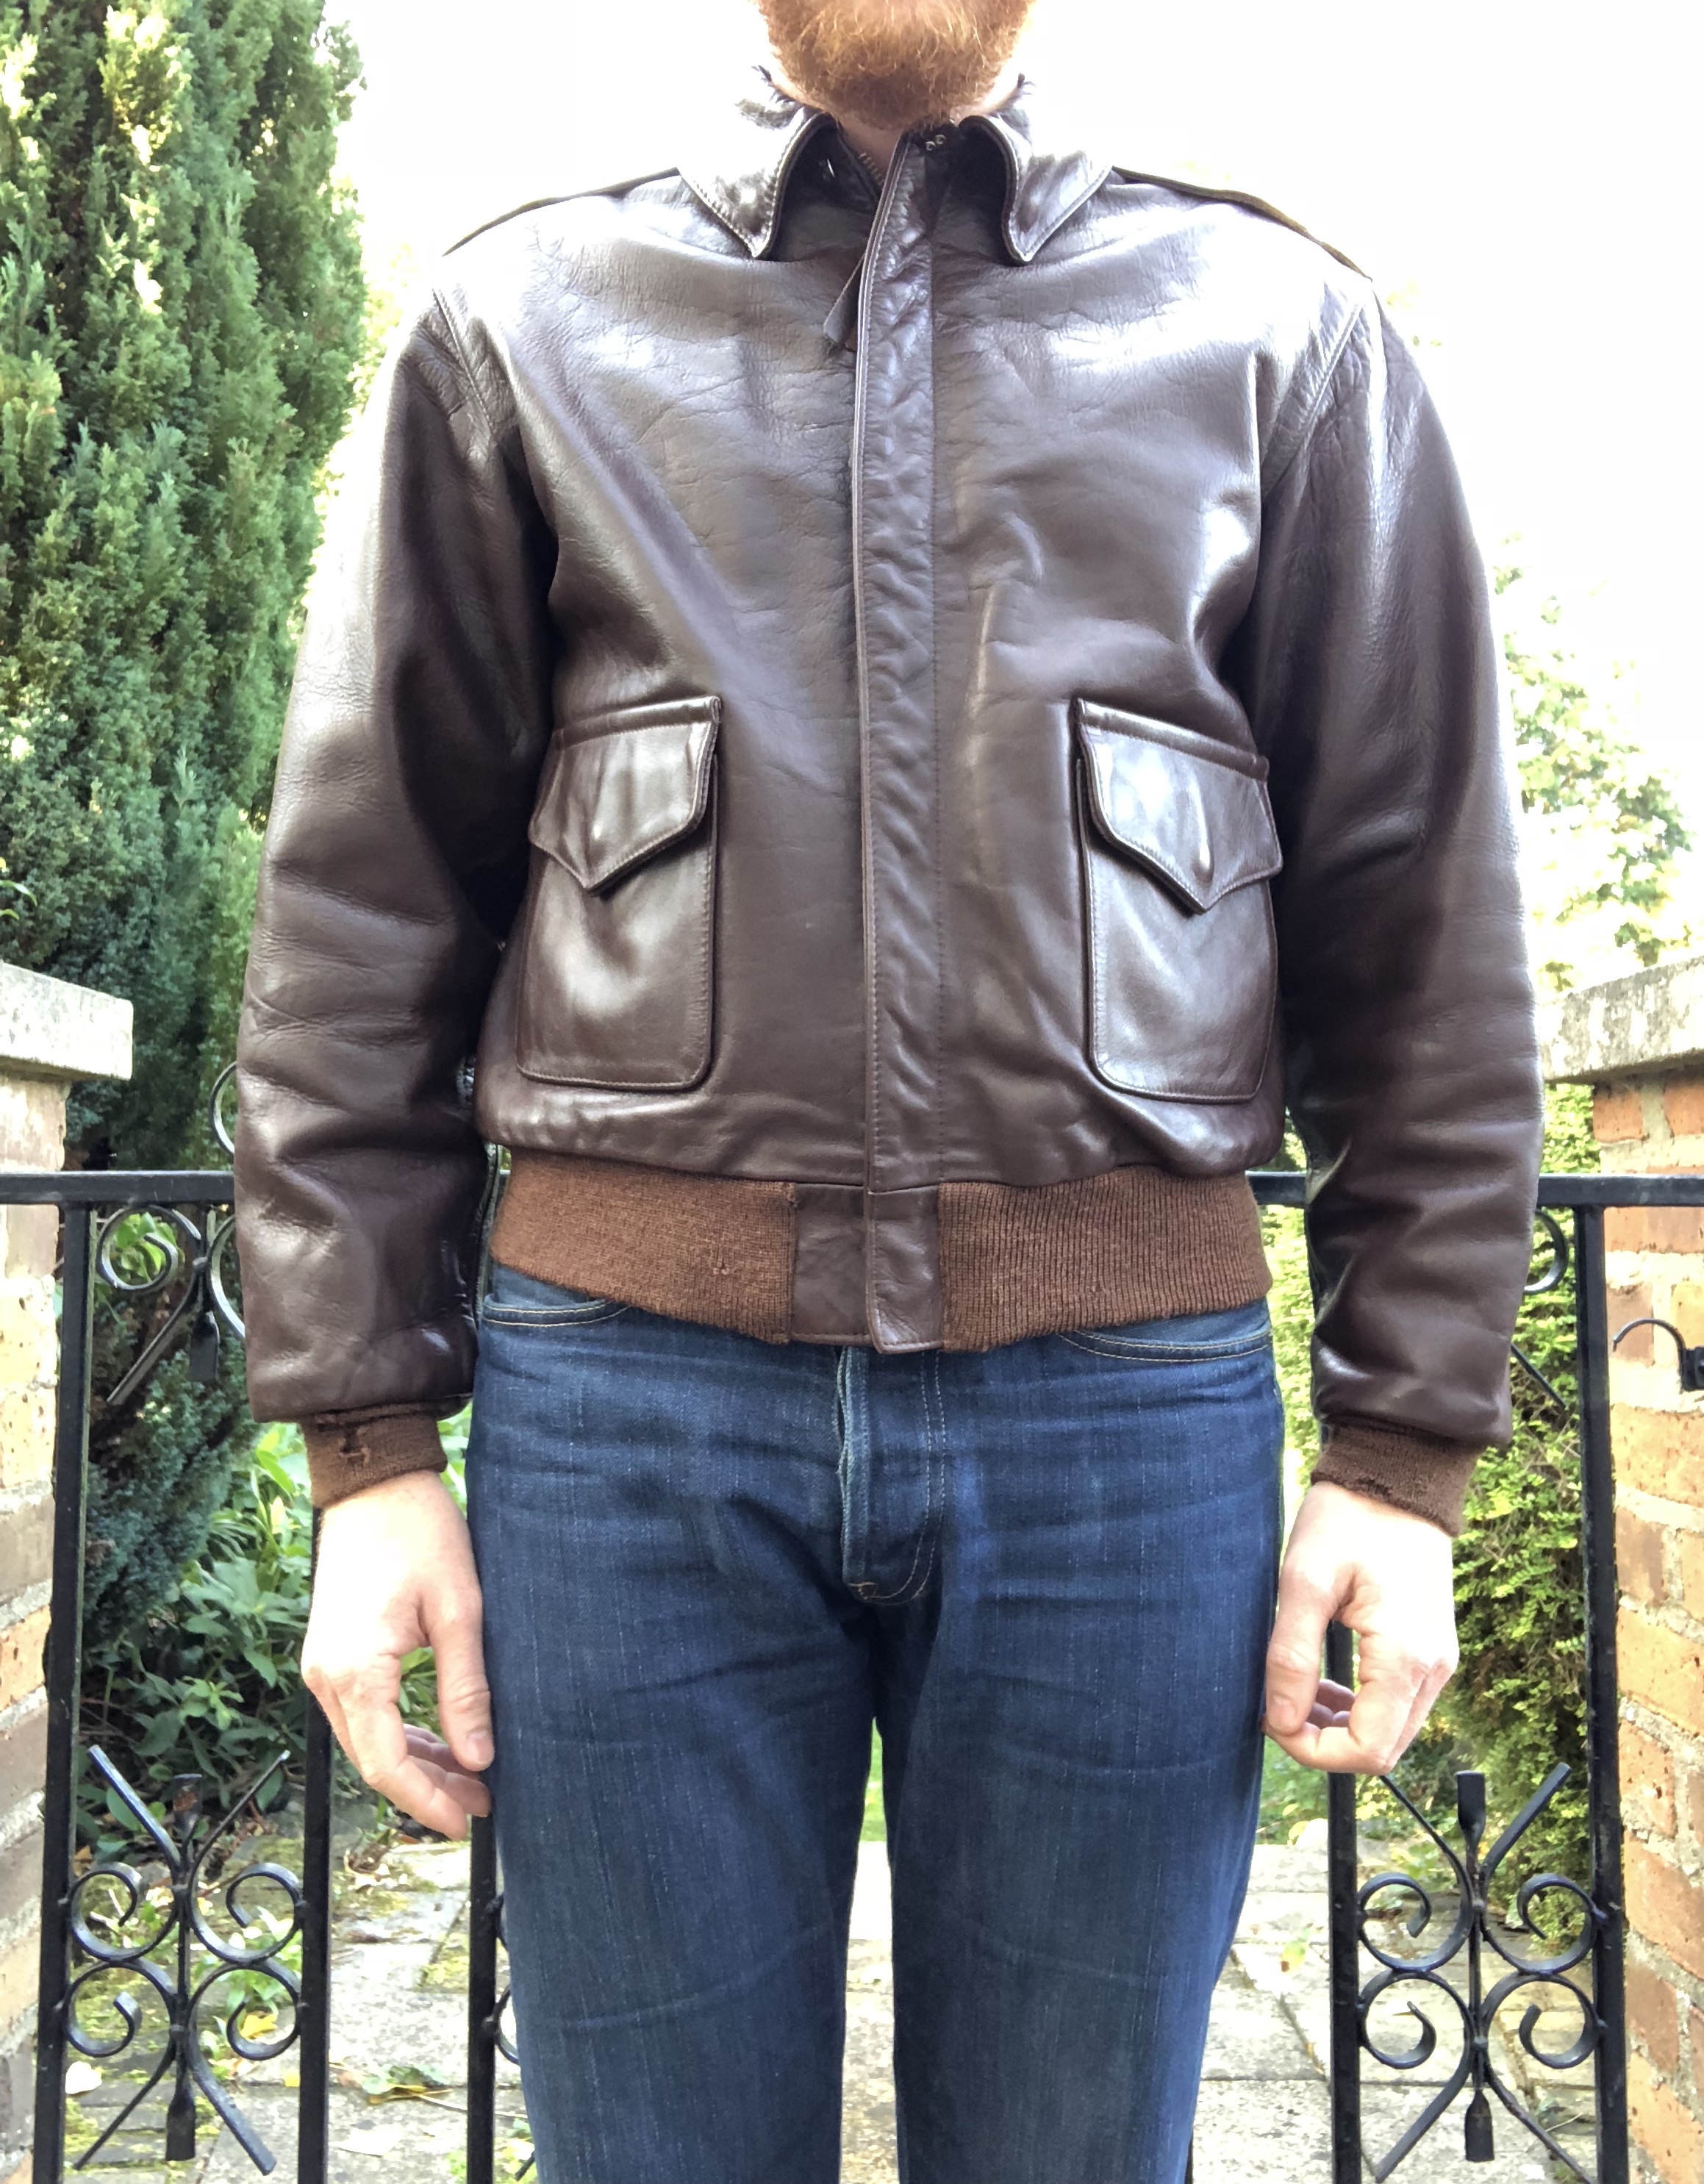 Eastman A-2 Flight Jacket - sizing fit pics - 38 or 40? | The Fedora Lounge